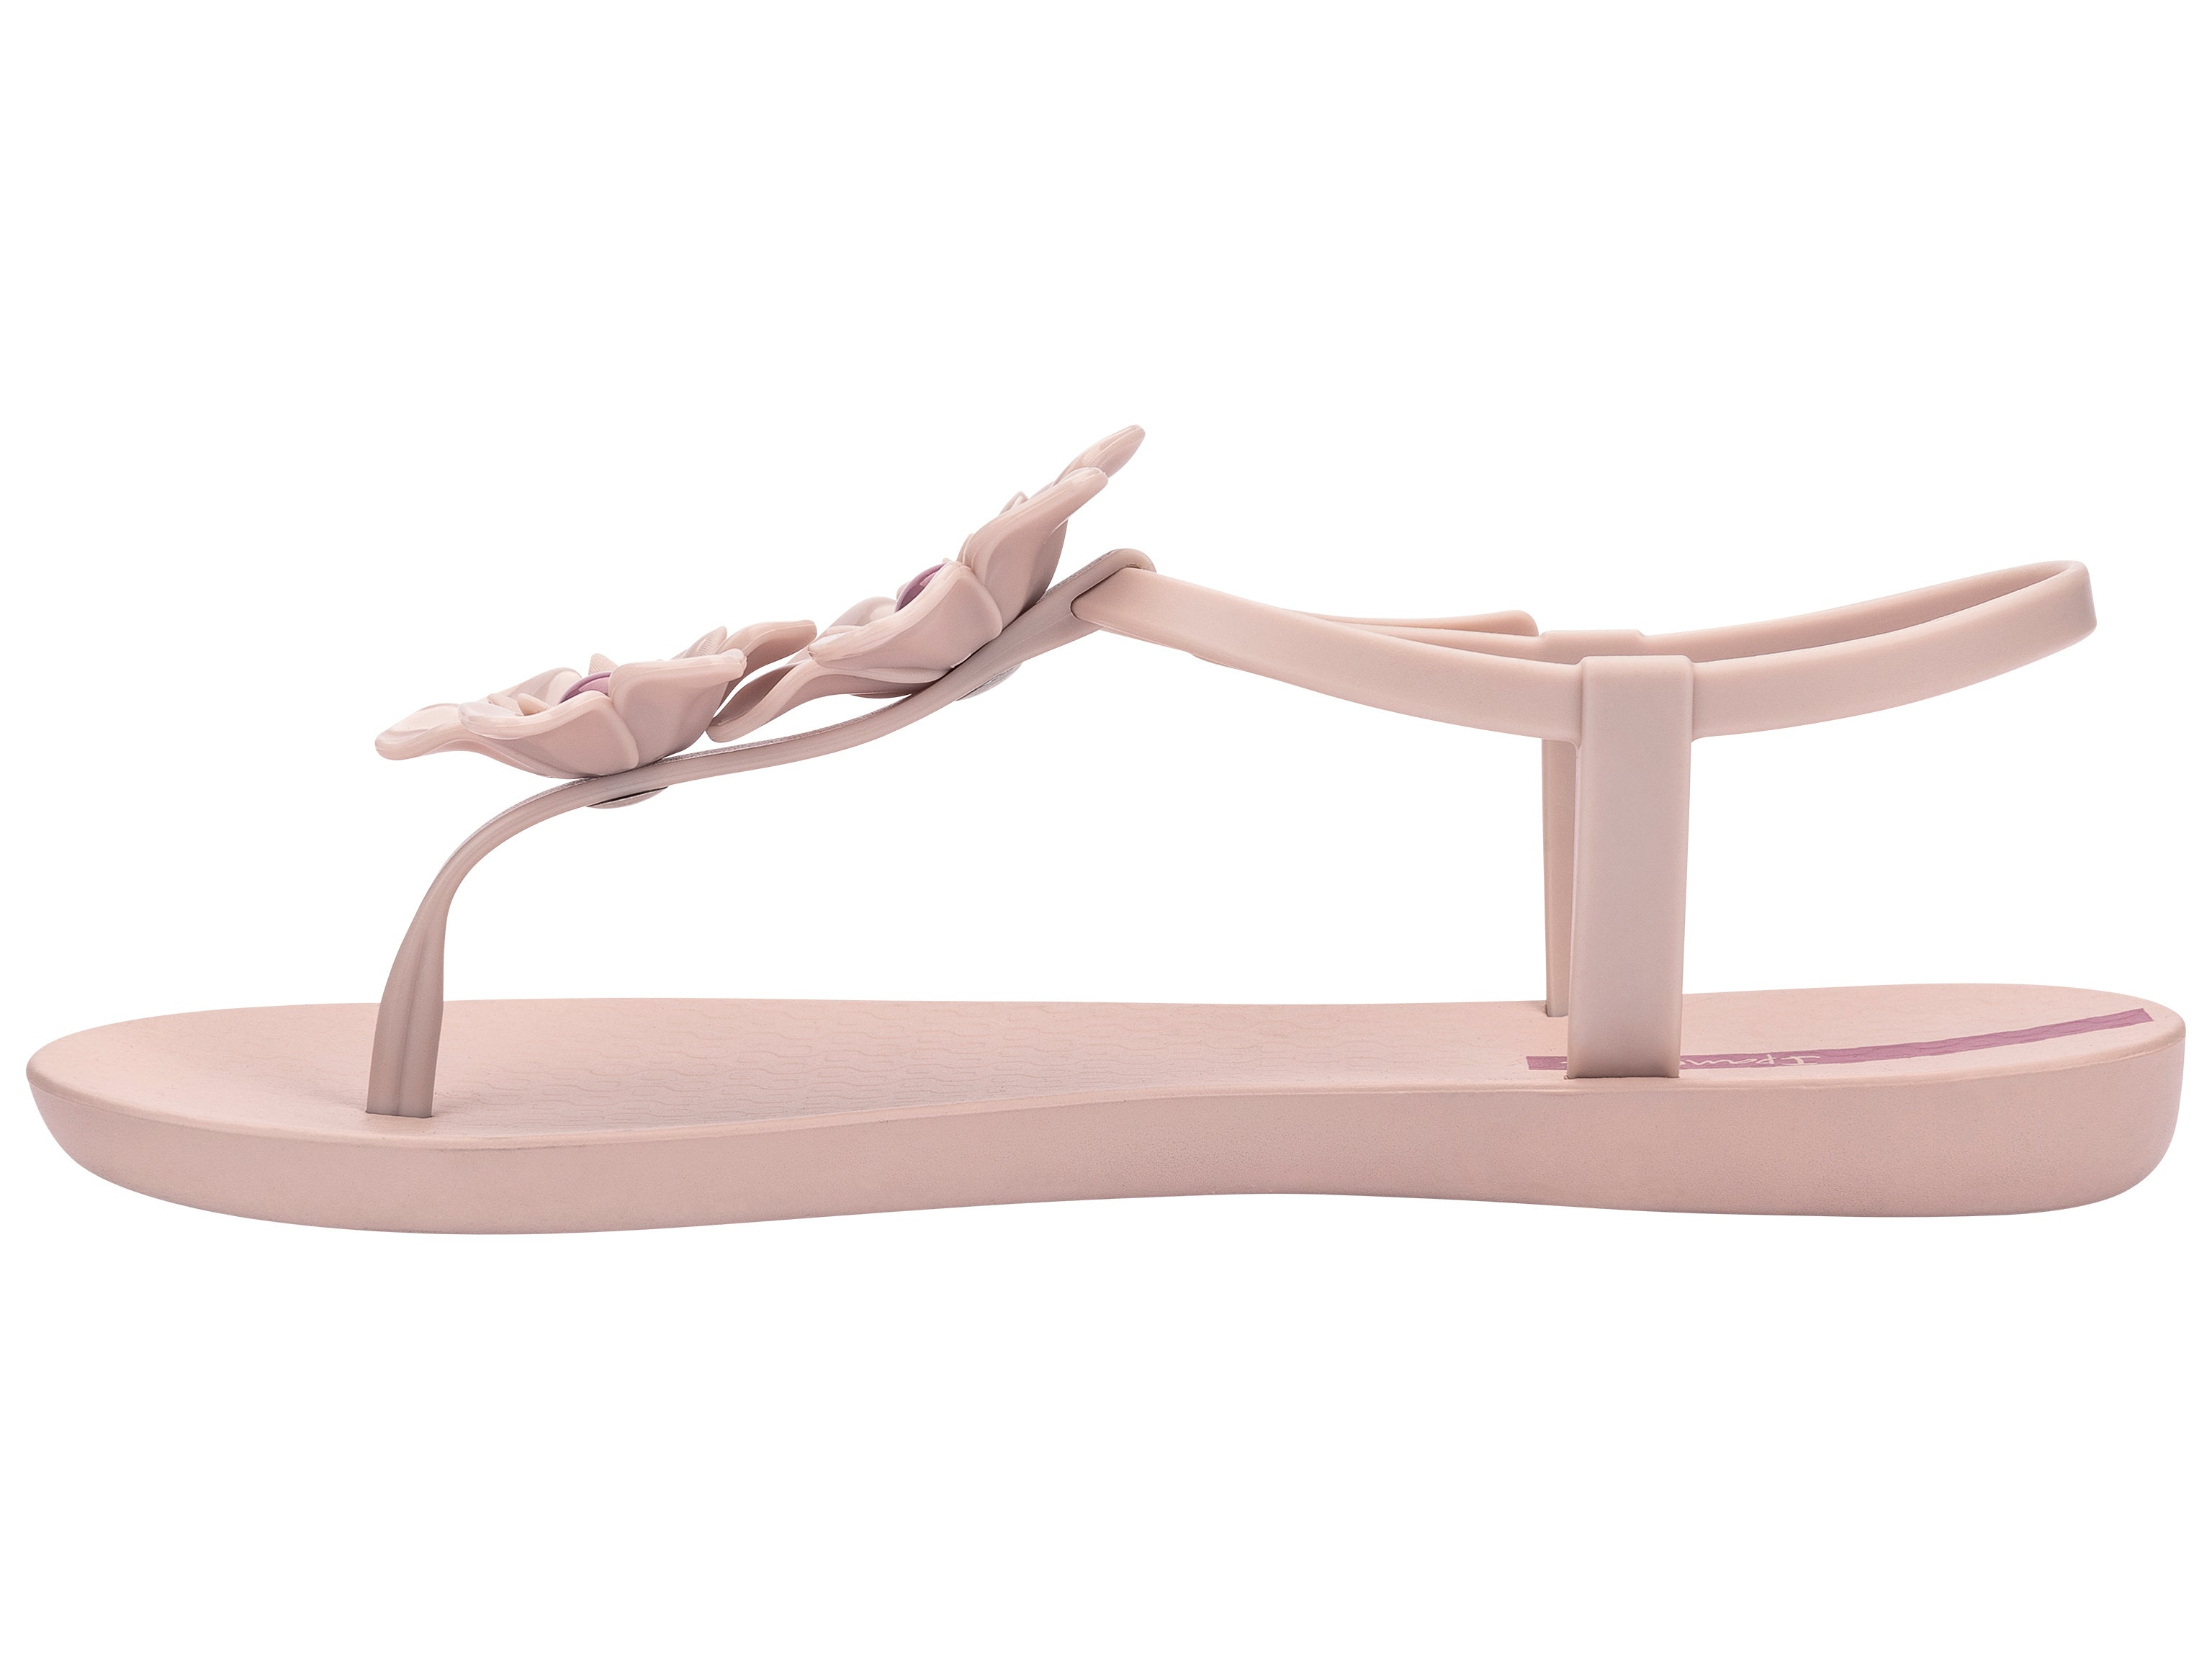 Inner side view of a pink Ipanema Duo Flowers women's t-strap sandal with two flowers.